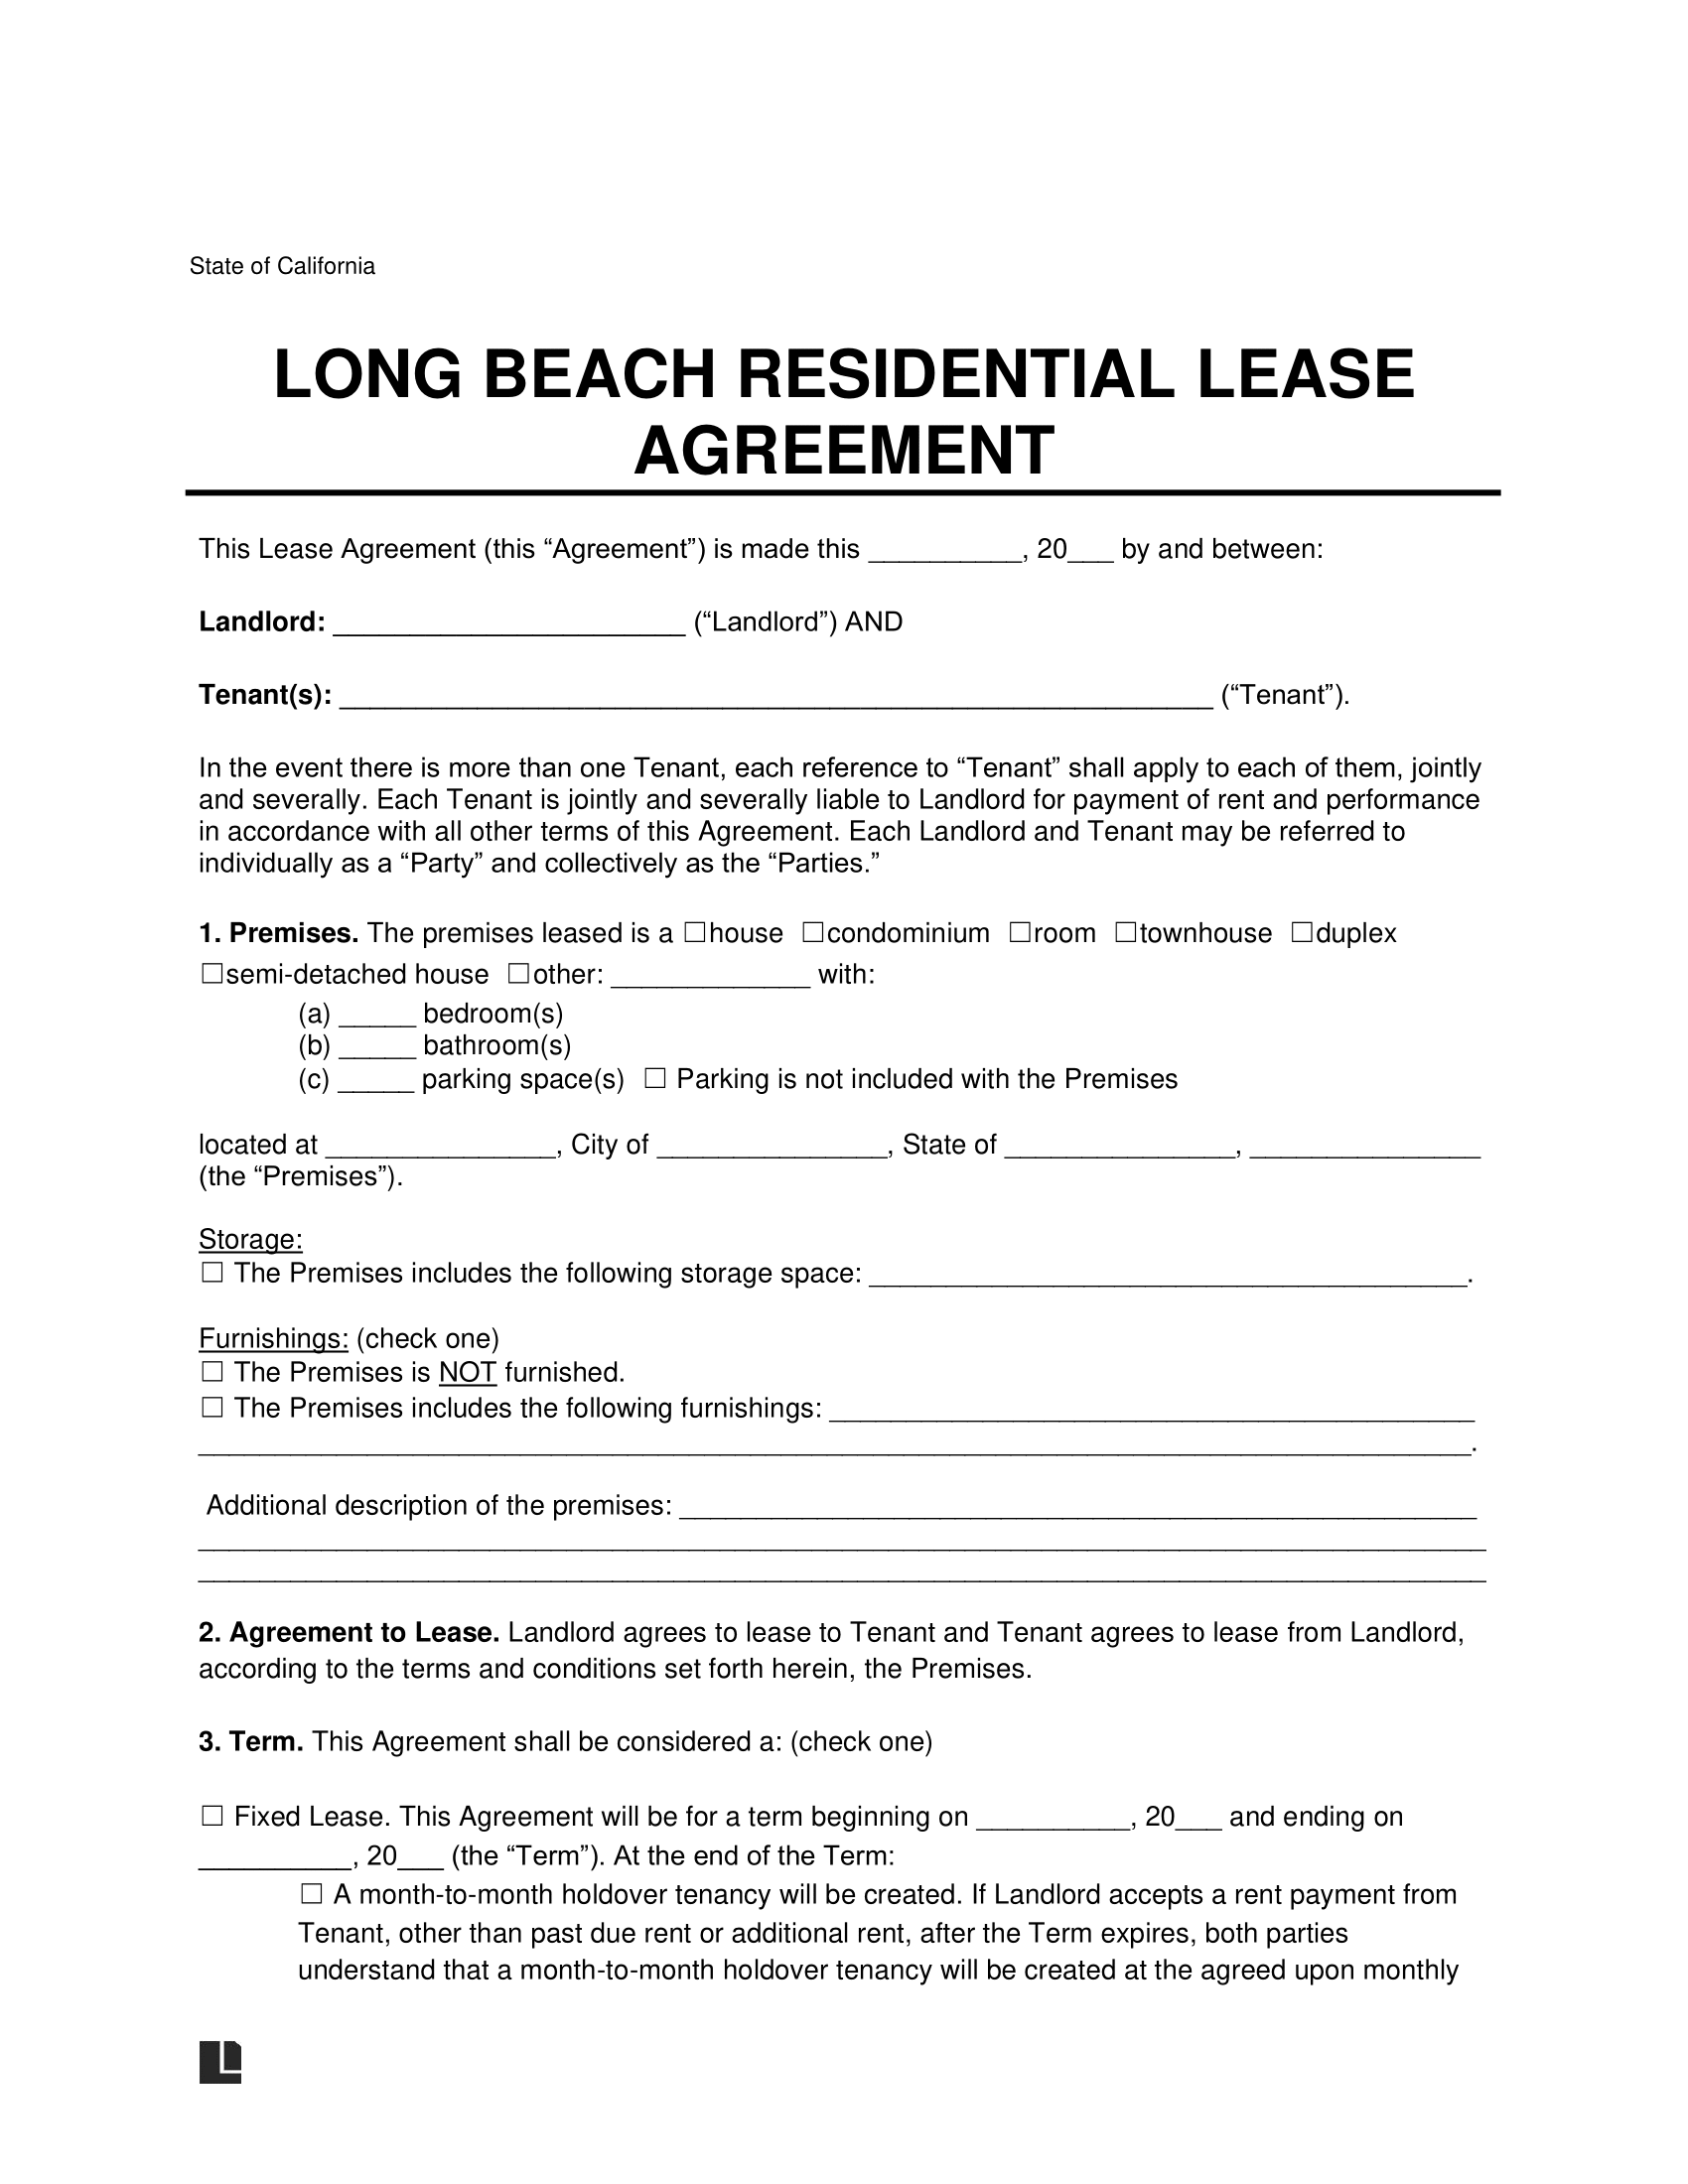 Long Beach Residential Lease Agreement Template